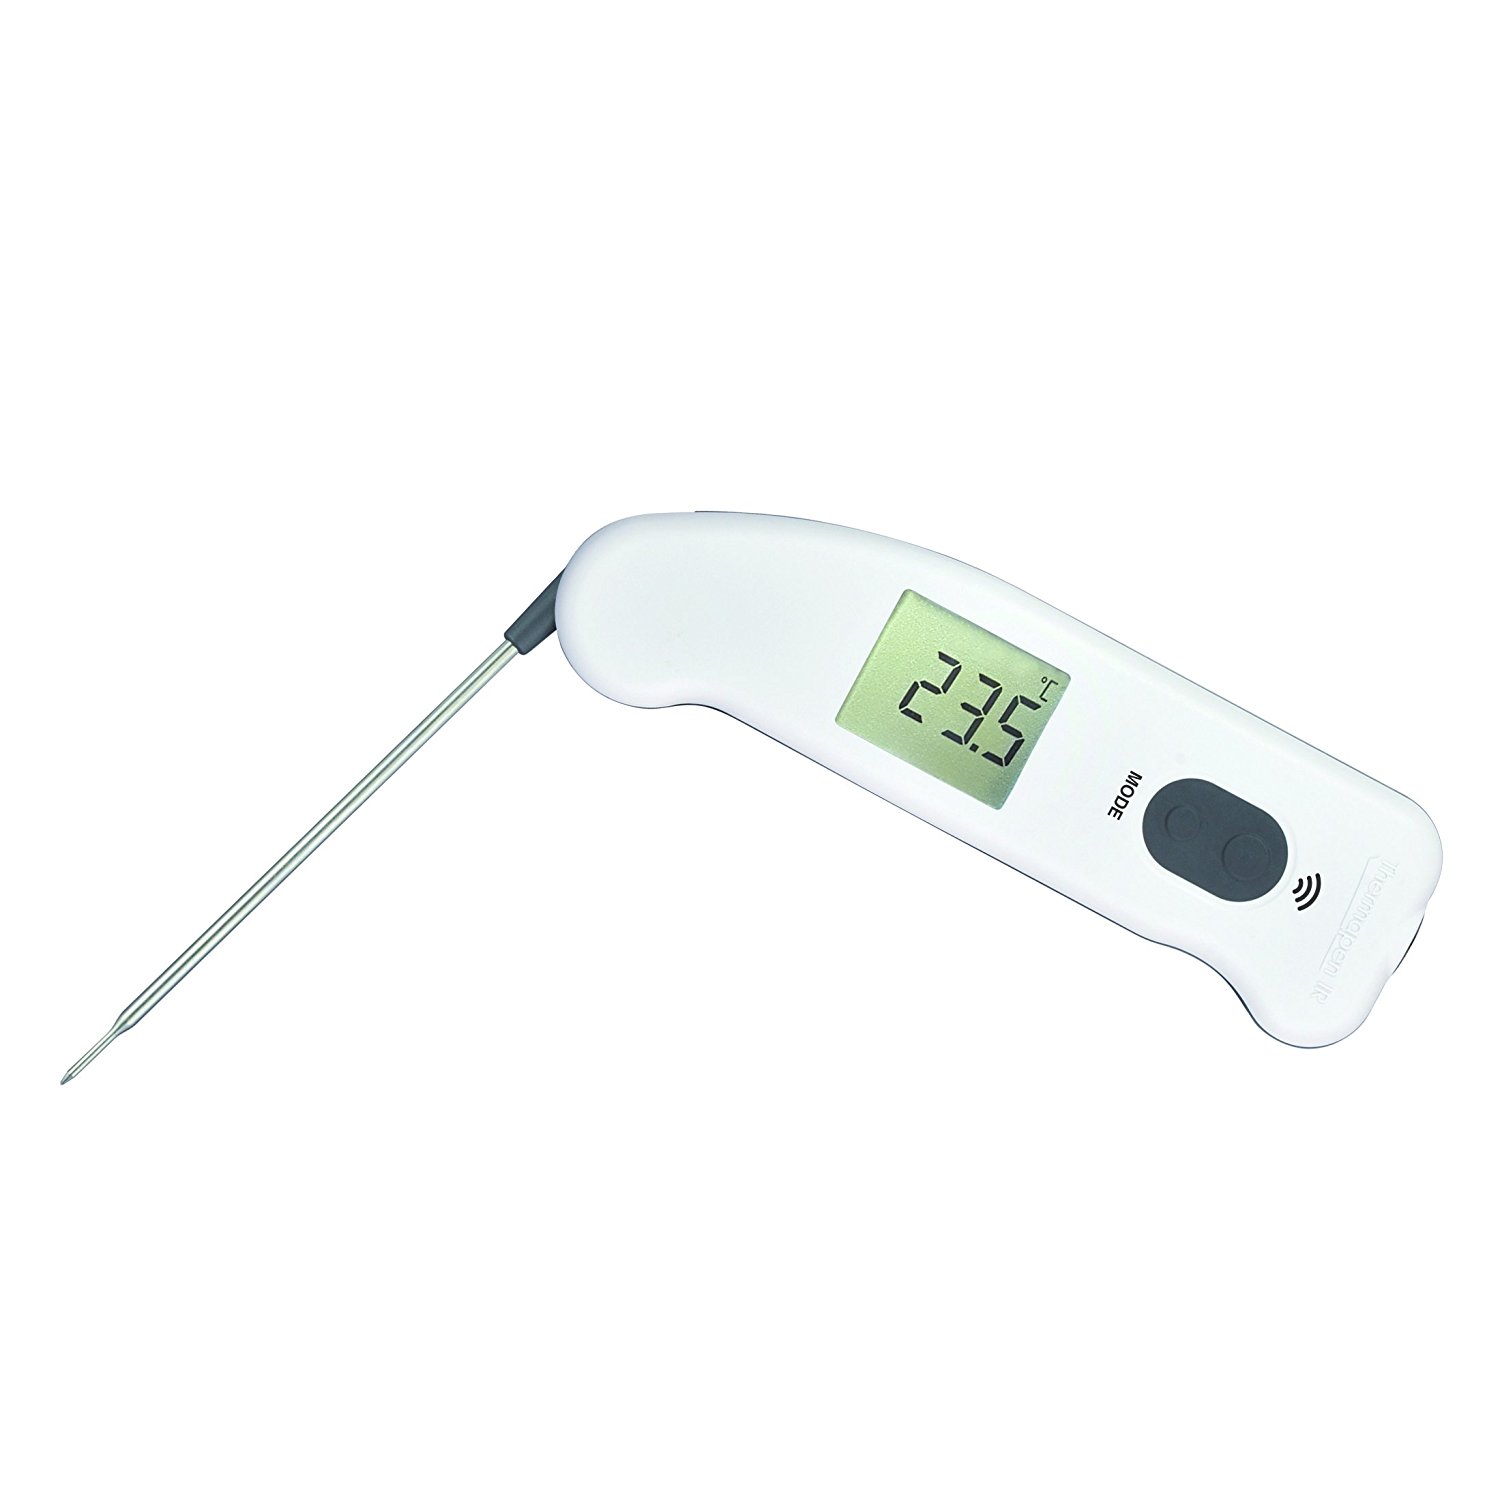 Infrared Thermometer with Foldaway Probe & Automatic 360° rotational Display ETI Thermapen IR 